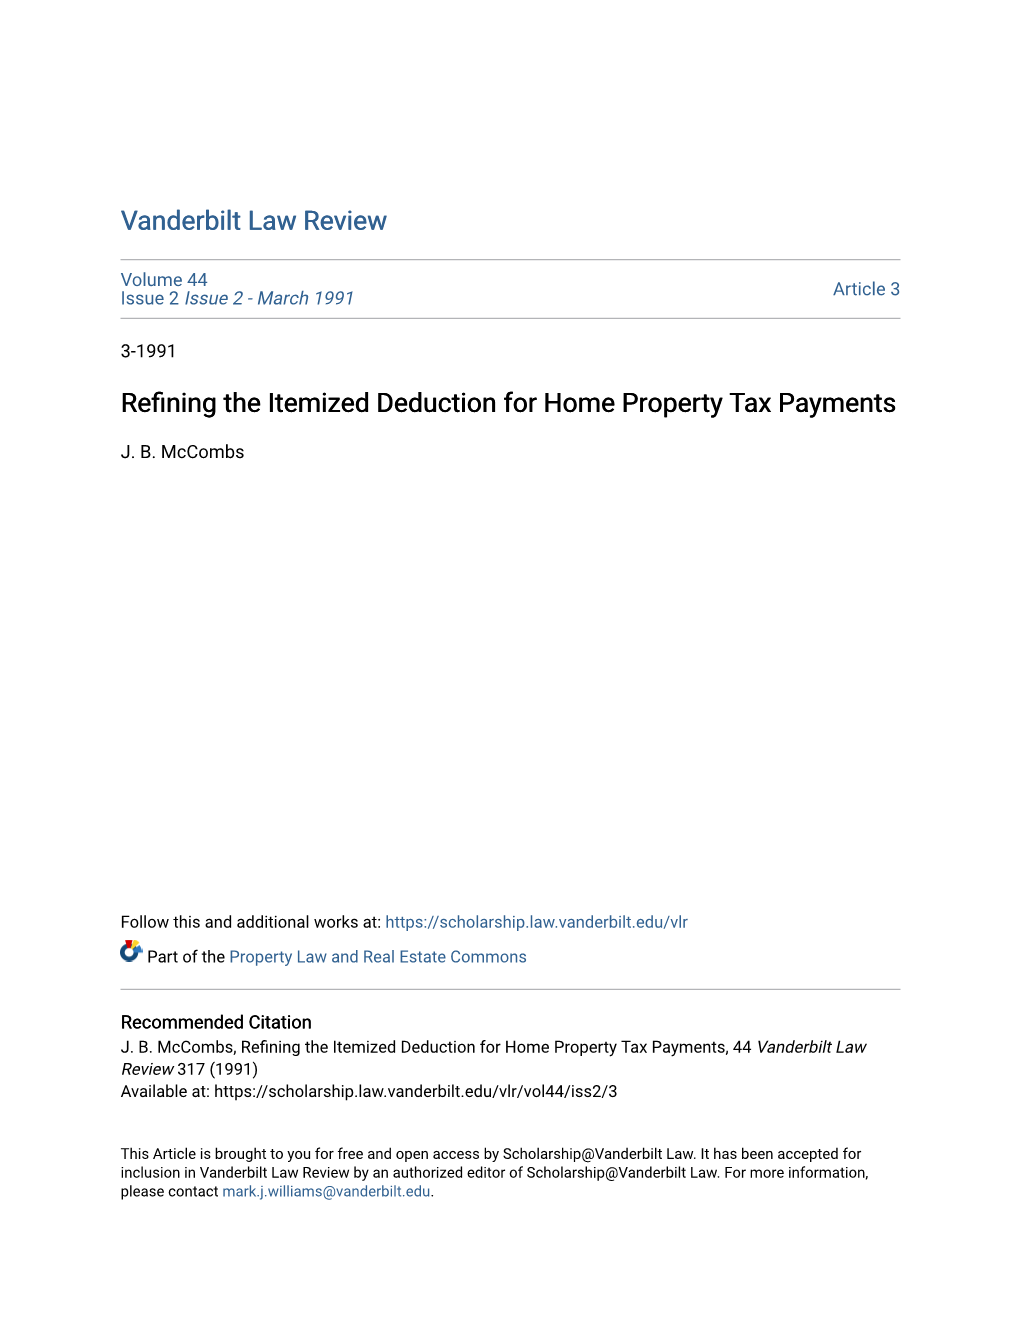 Refining the Itemized Deduction for Home Property Tax Payments